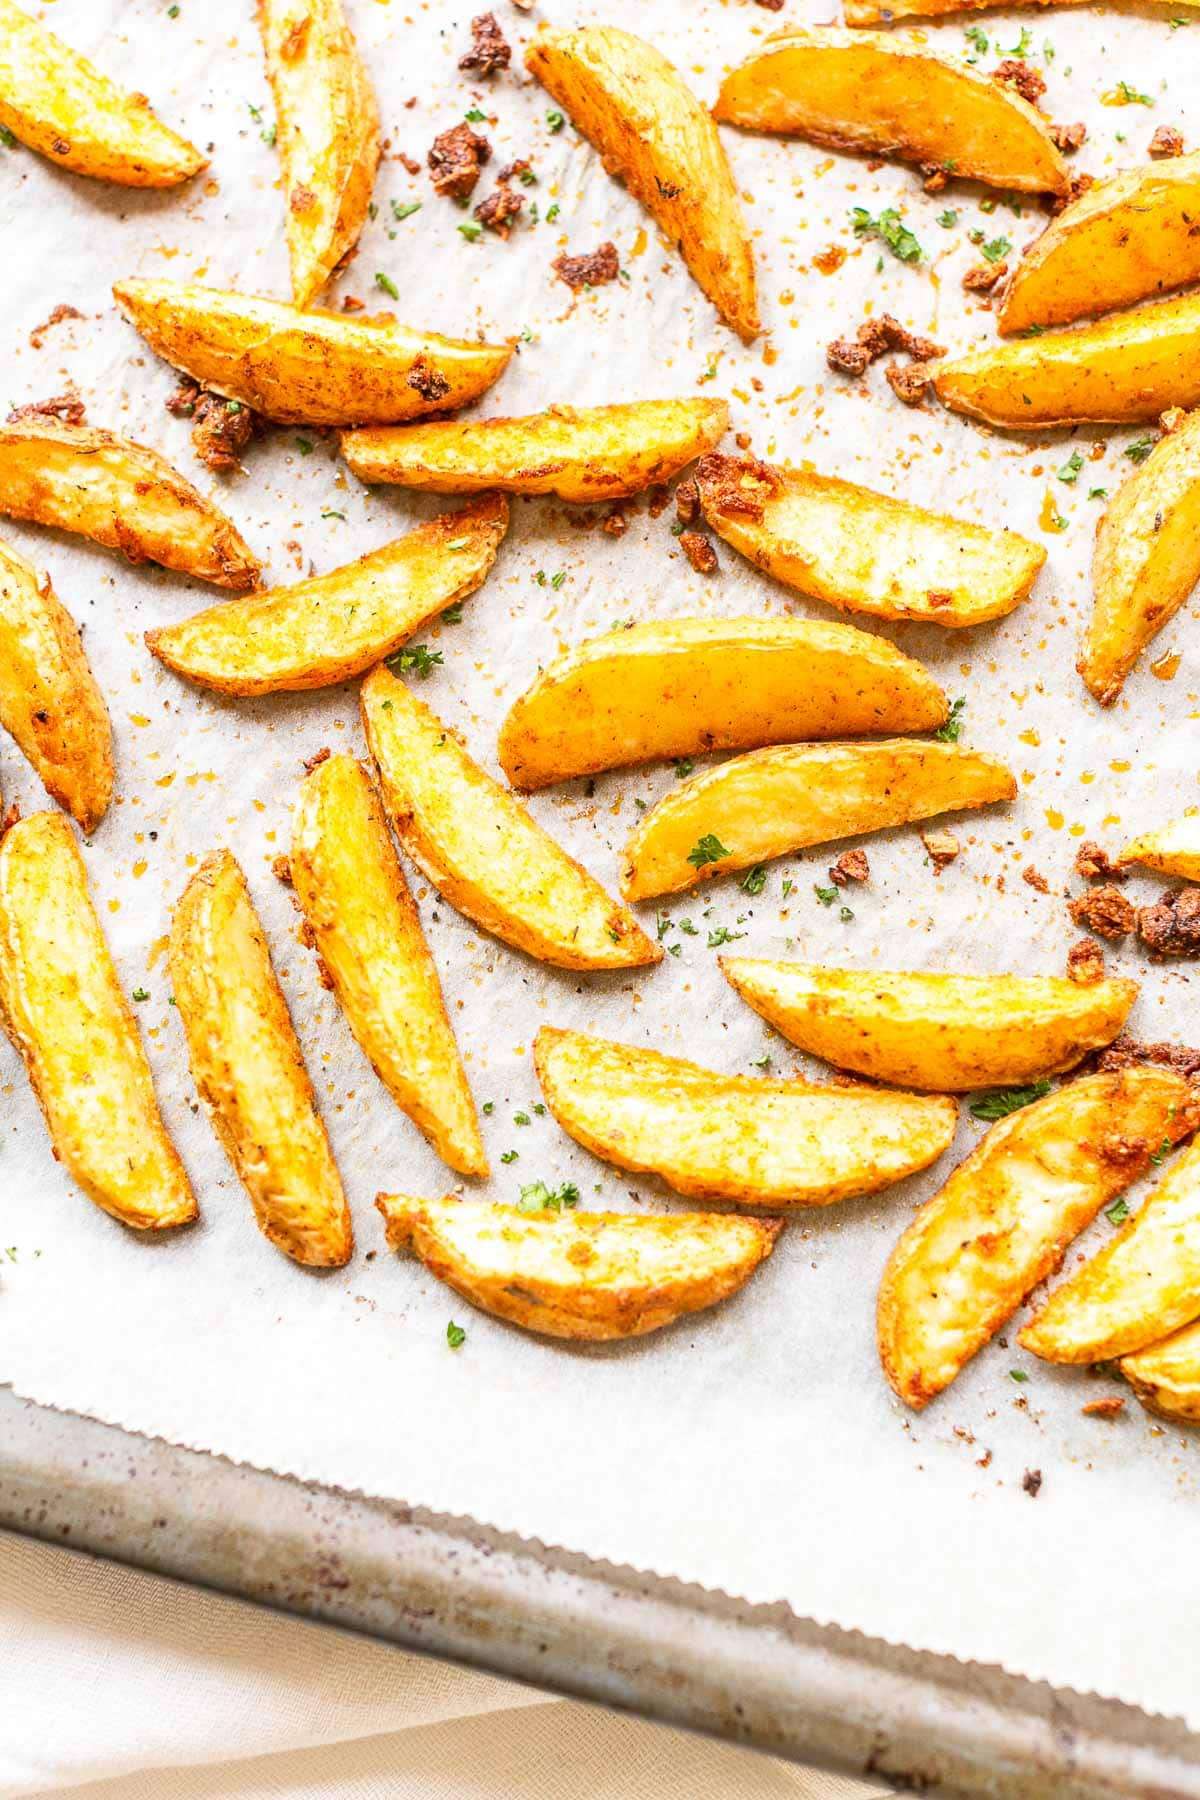 How To Make Oven Baked Potato Wedges